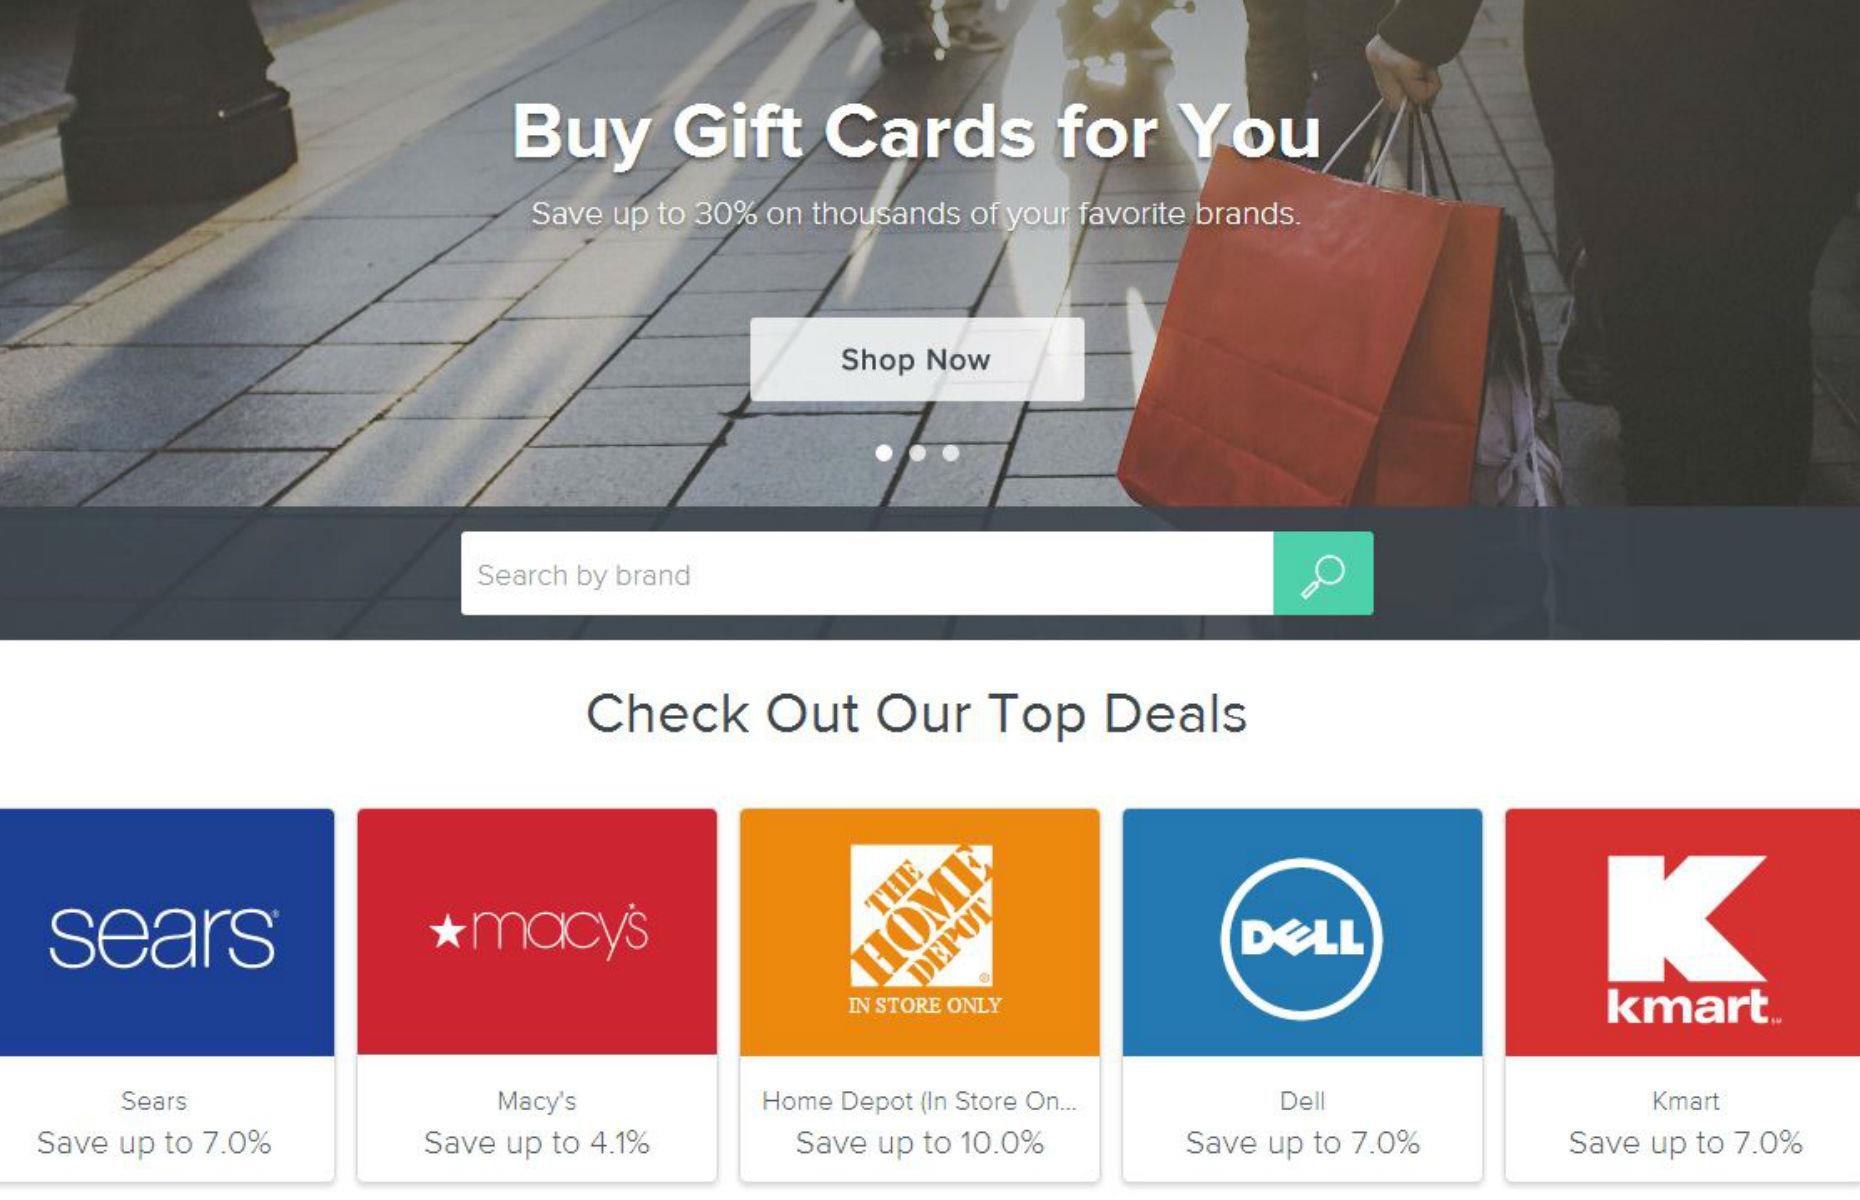 Use gift cards on your purchases for big savings